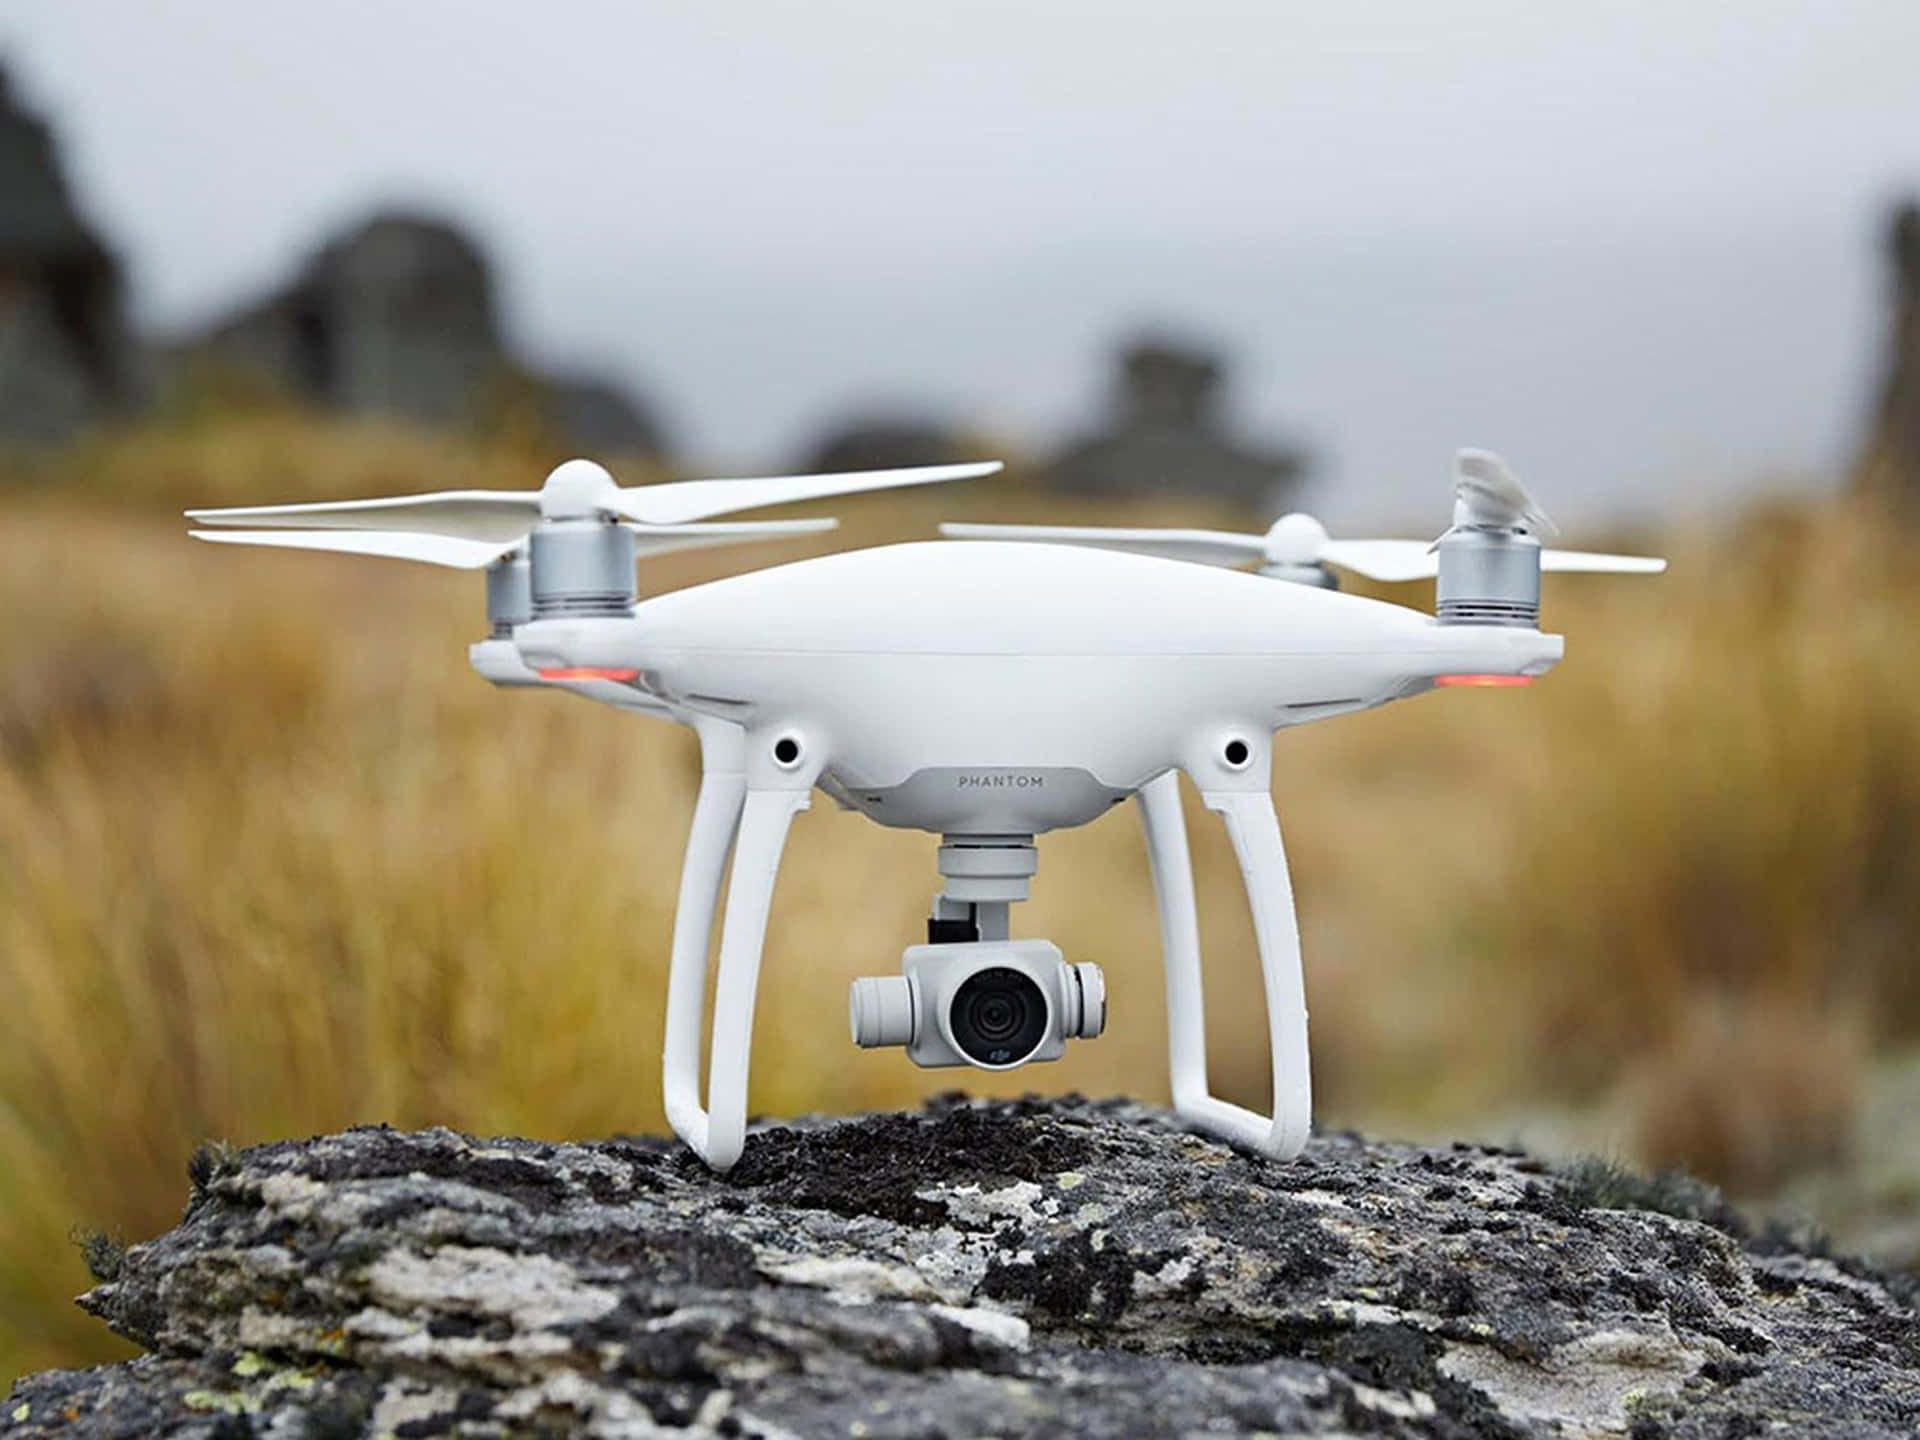 "Gazing up to the majestic sky: A view of a drone taking flight"